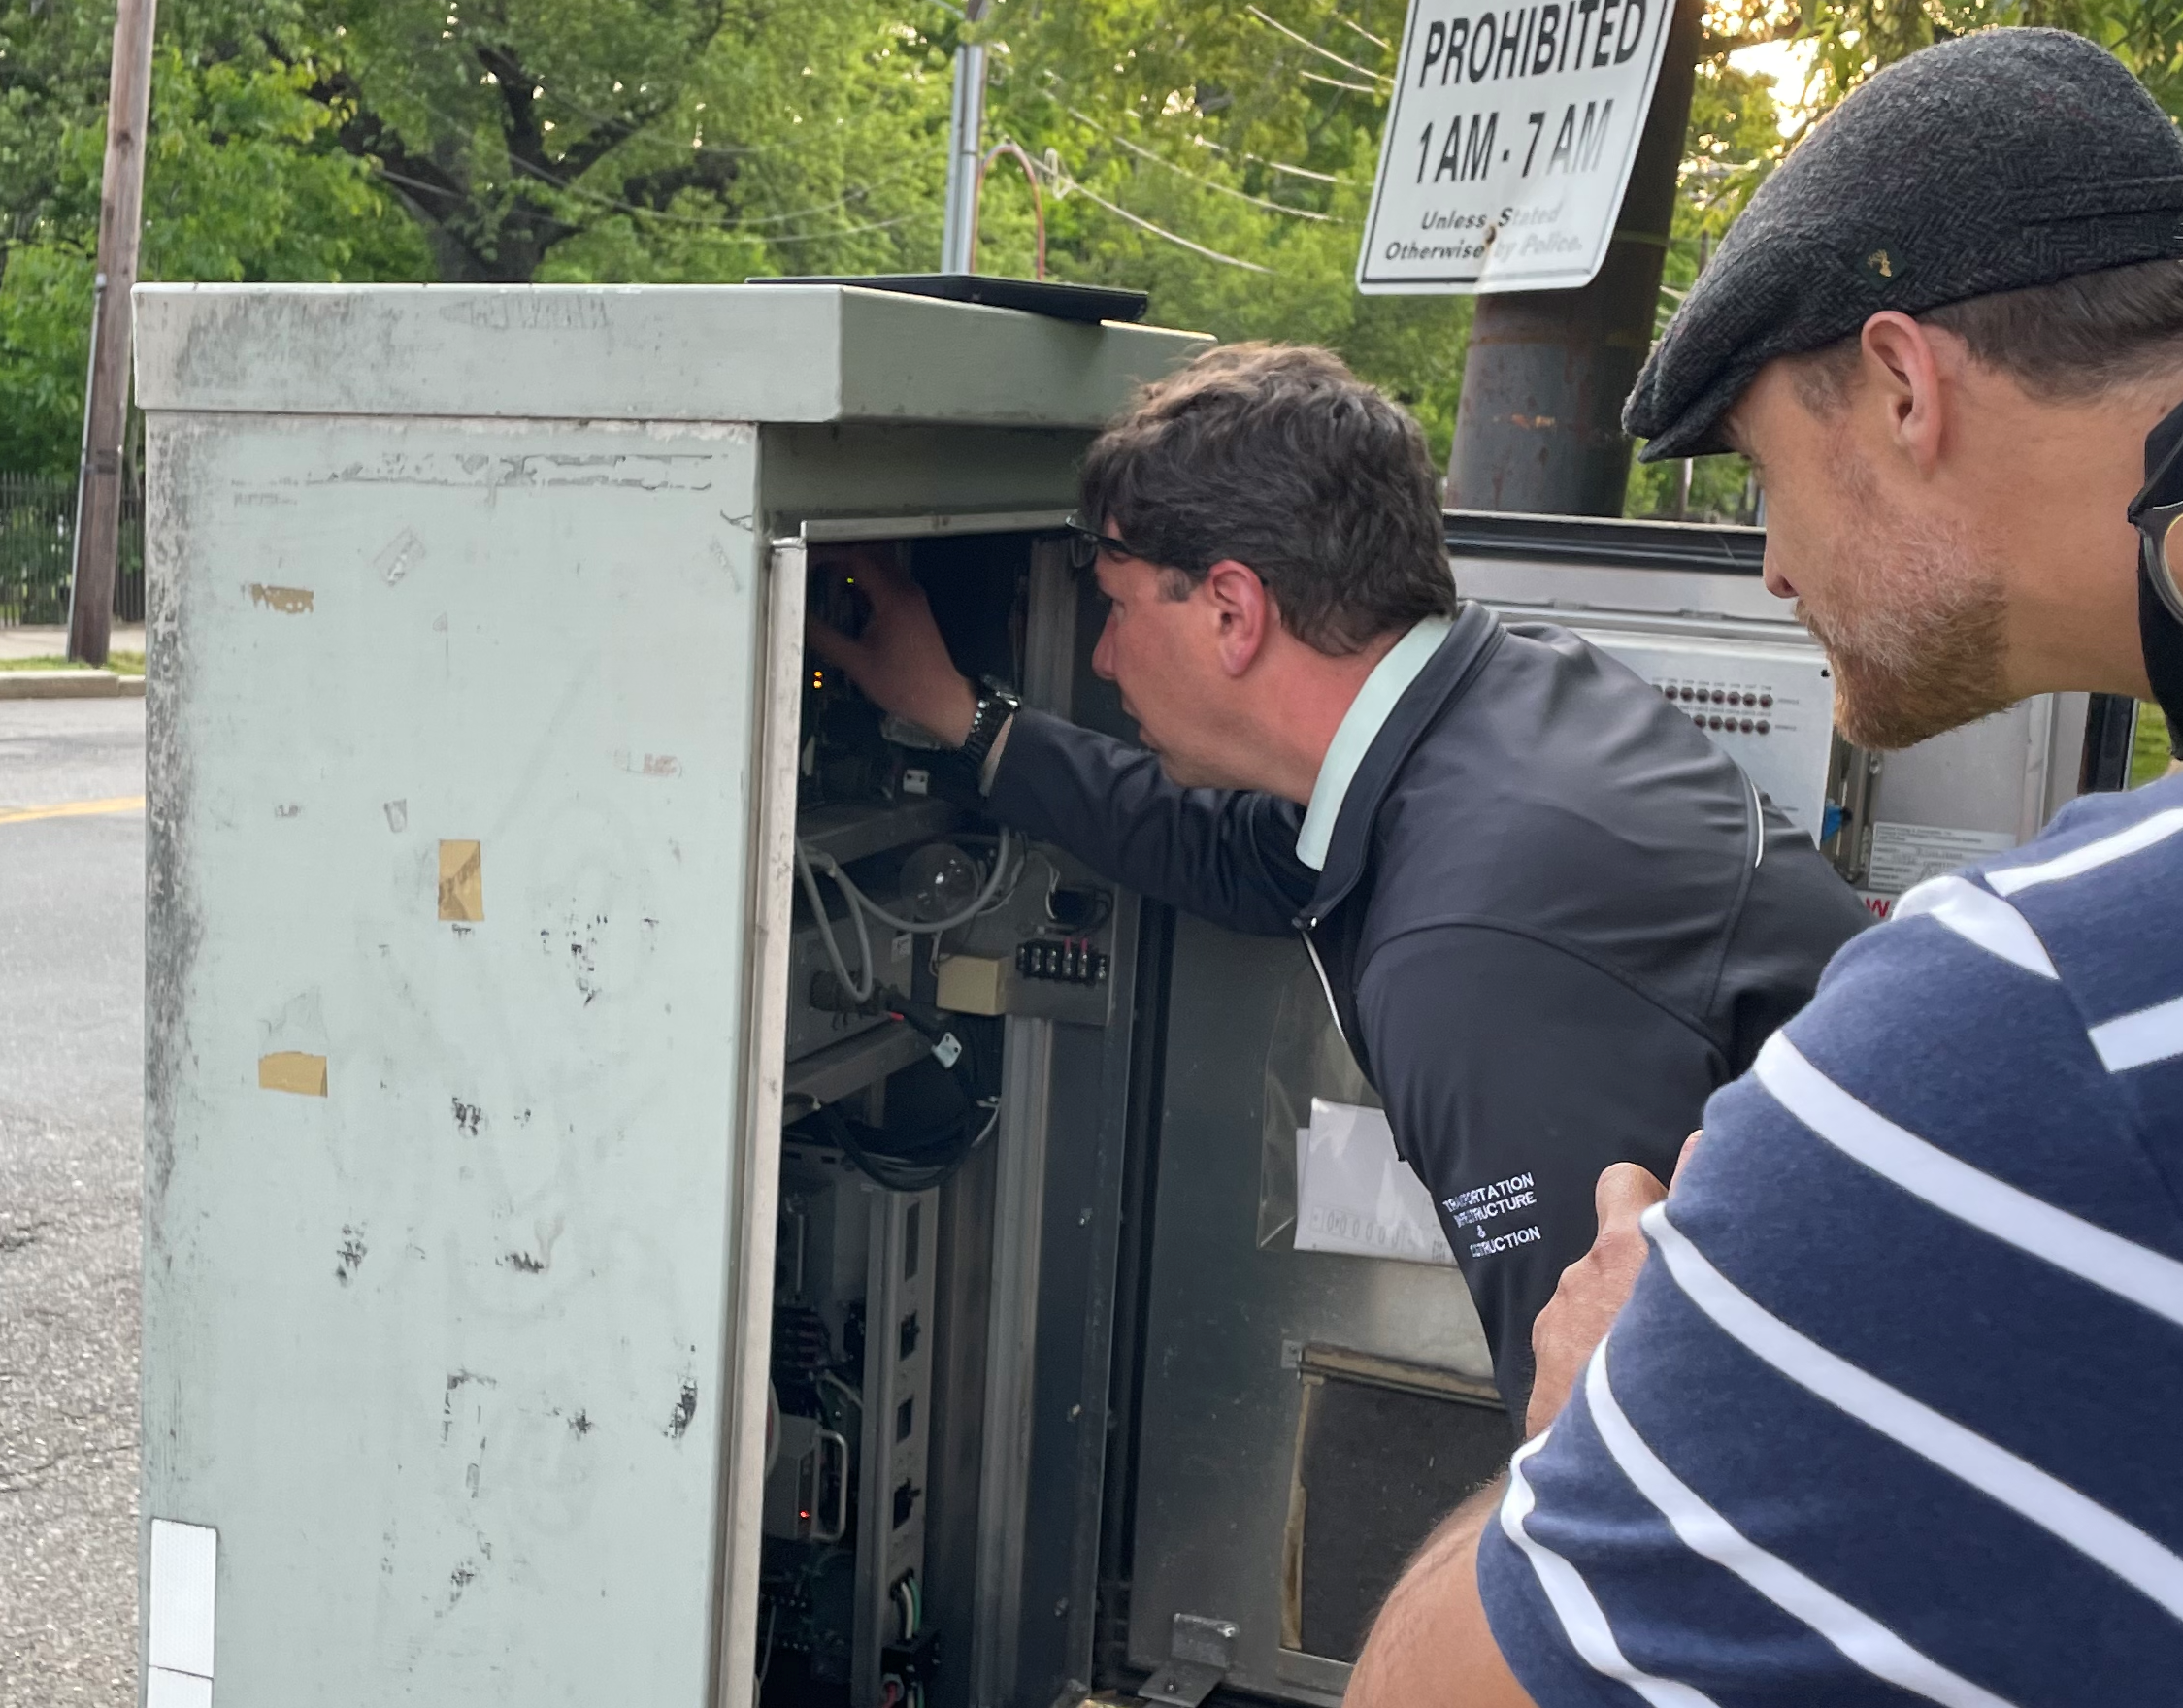 Dept. of Conservation and Recreation Chief Engineer Jeff Parenti leans into a metal traffic signal cabinet on Broadway in Arlington to adjust the traffic signal timing of the pedestrian crosswalk while Somerville Director Transportation & Infrastructure Brad Rawson watches over his shoulder.